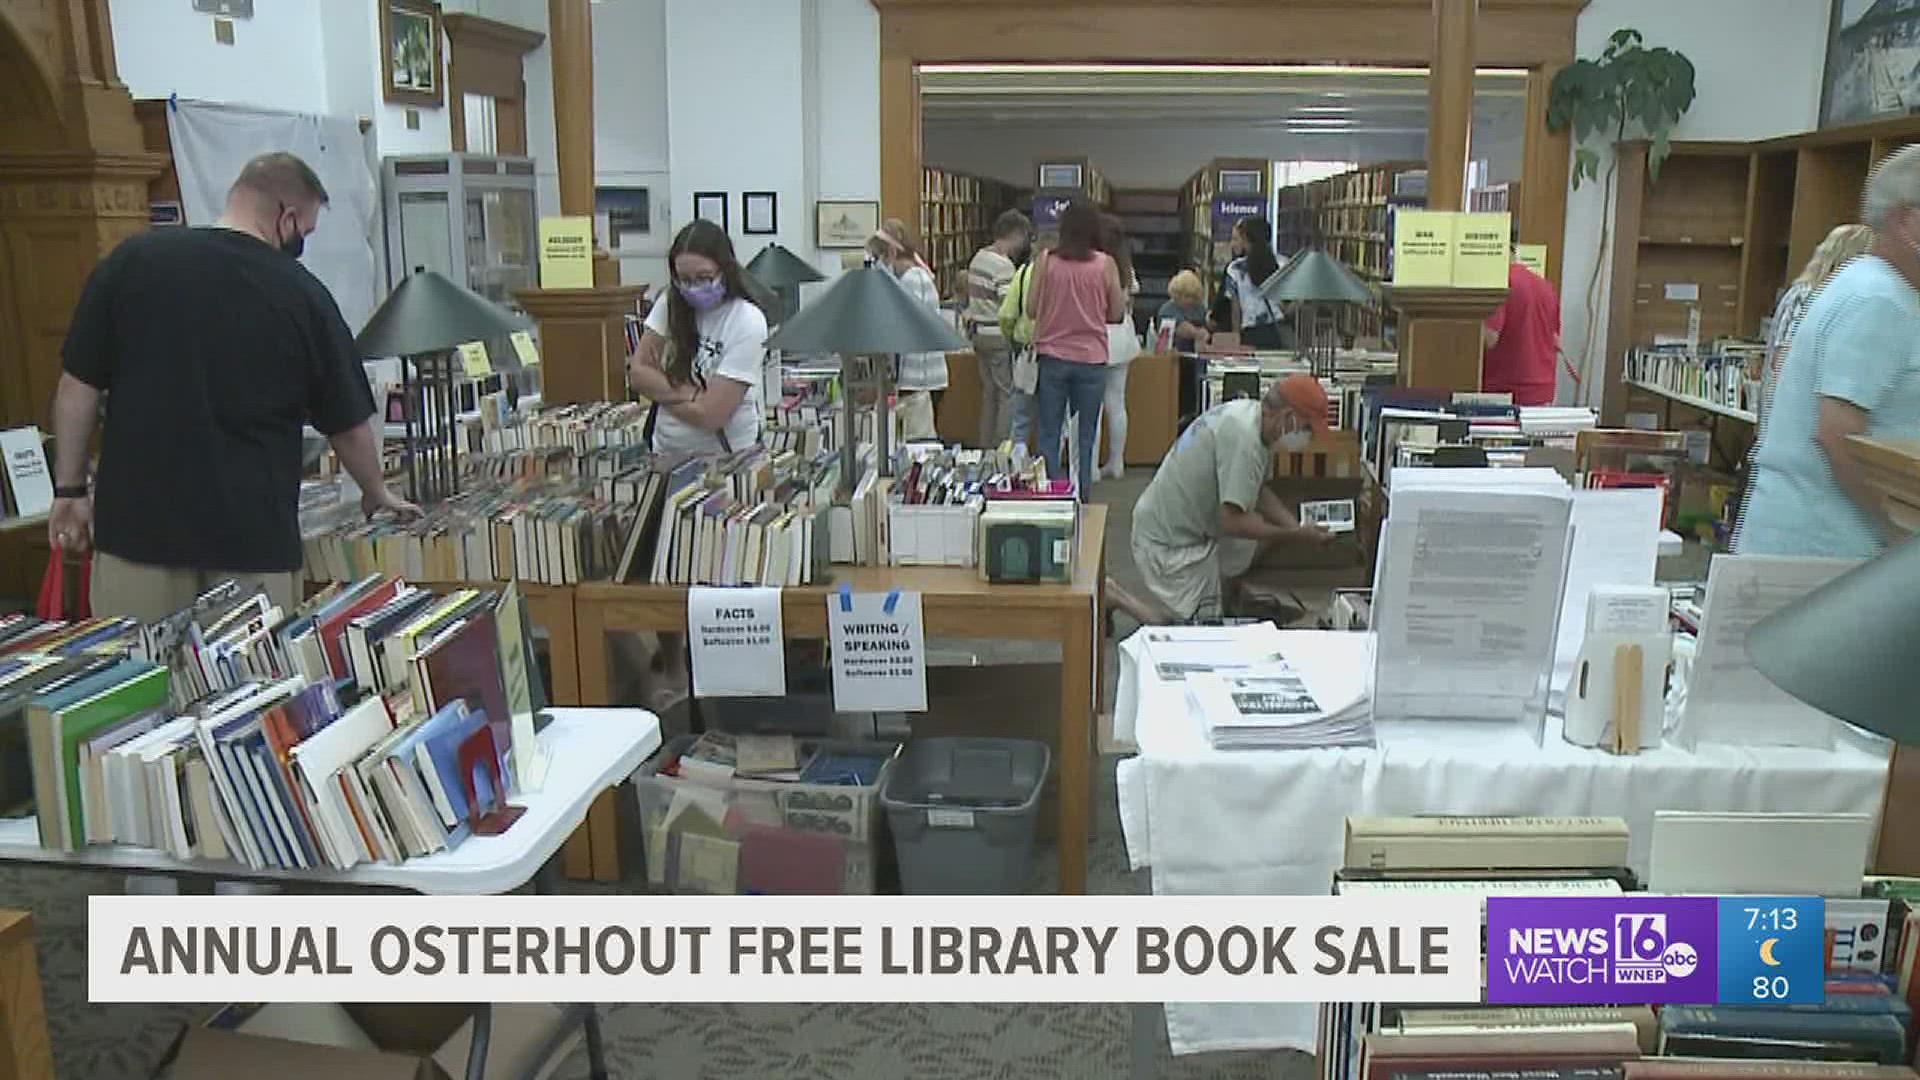 The popular fundraiser is taking place inside the library's reading room in Wilkes-Barre.